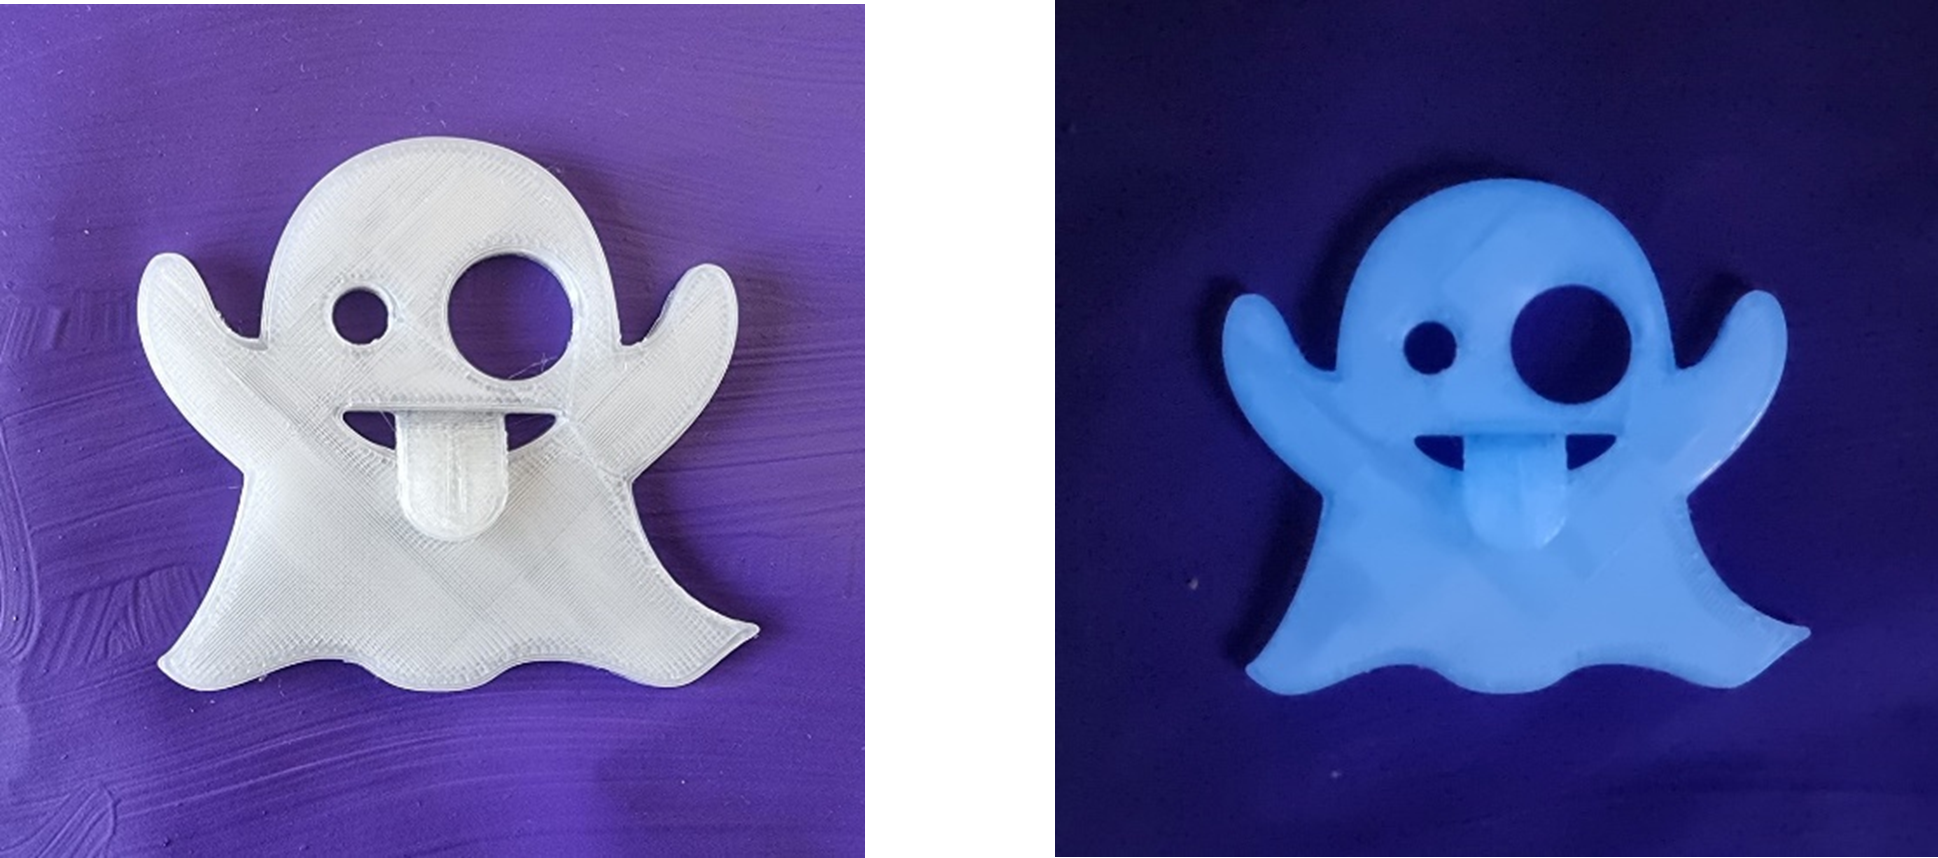 toy made by glow in the dark filament